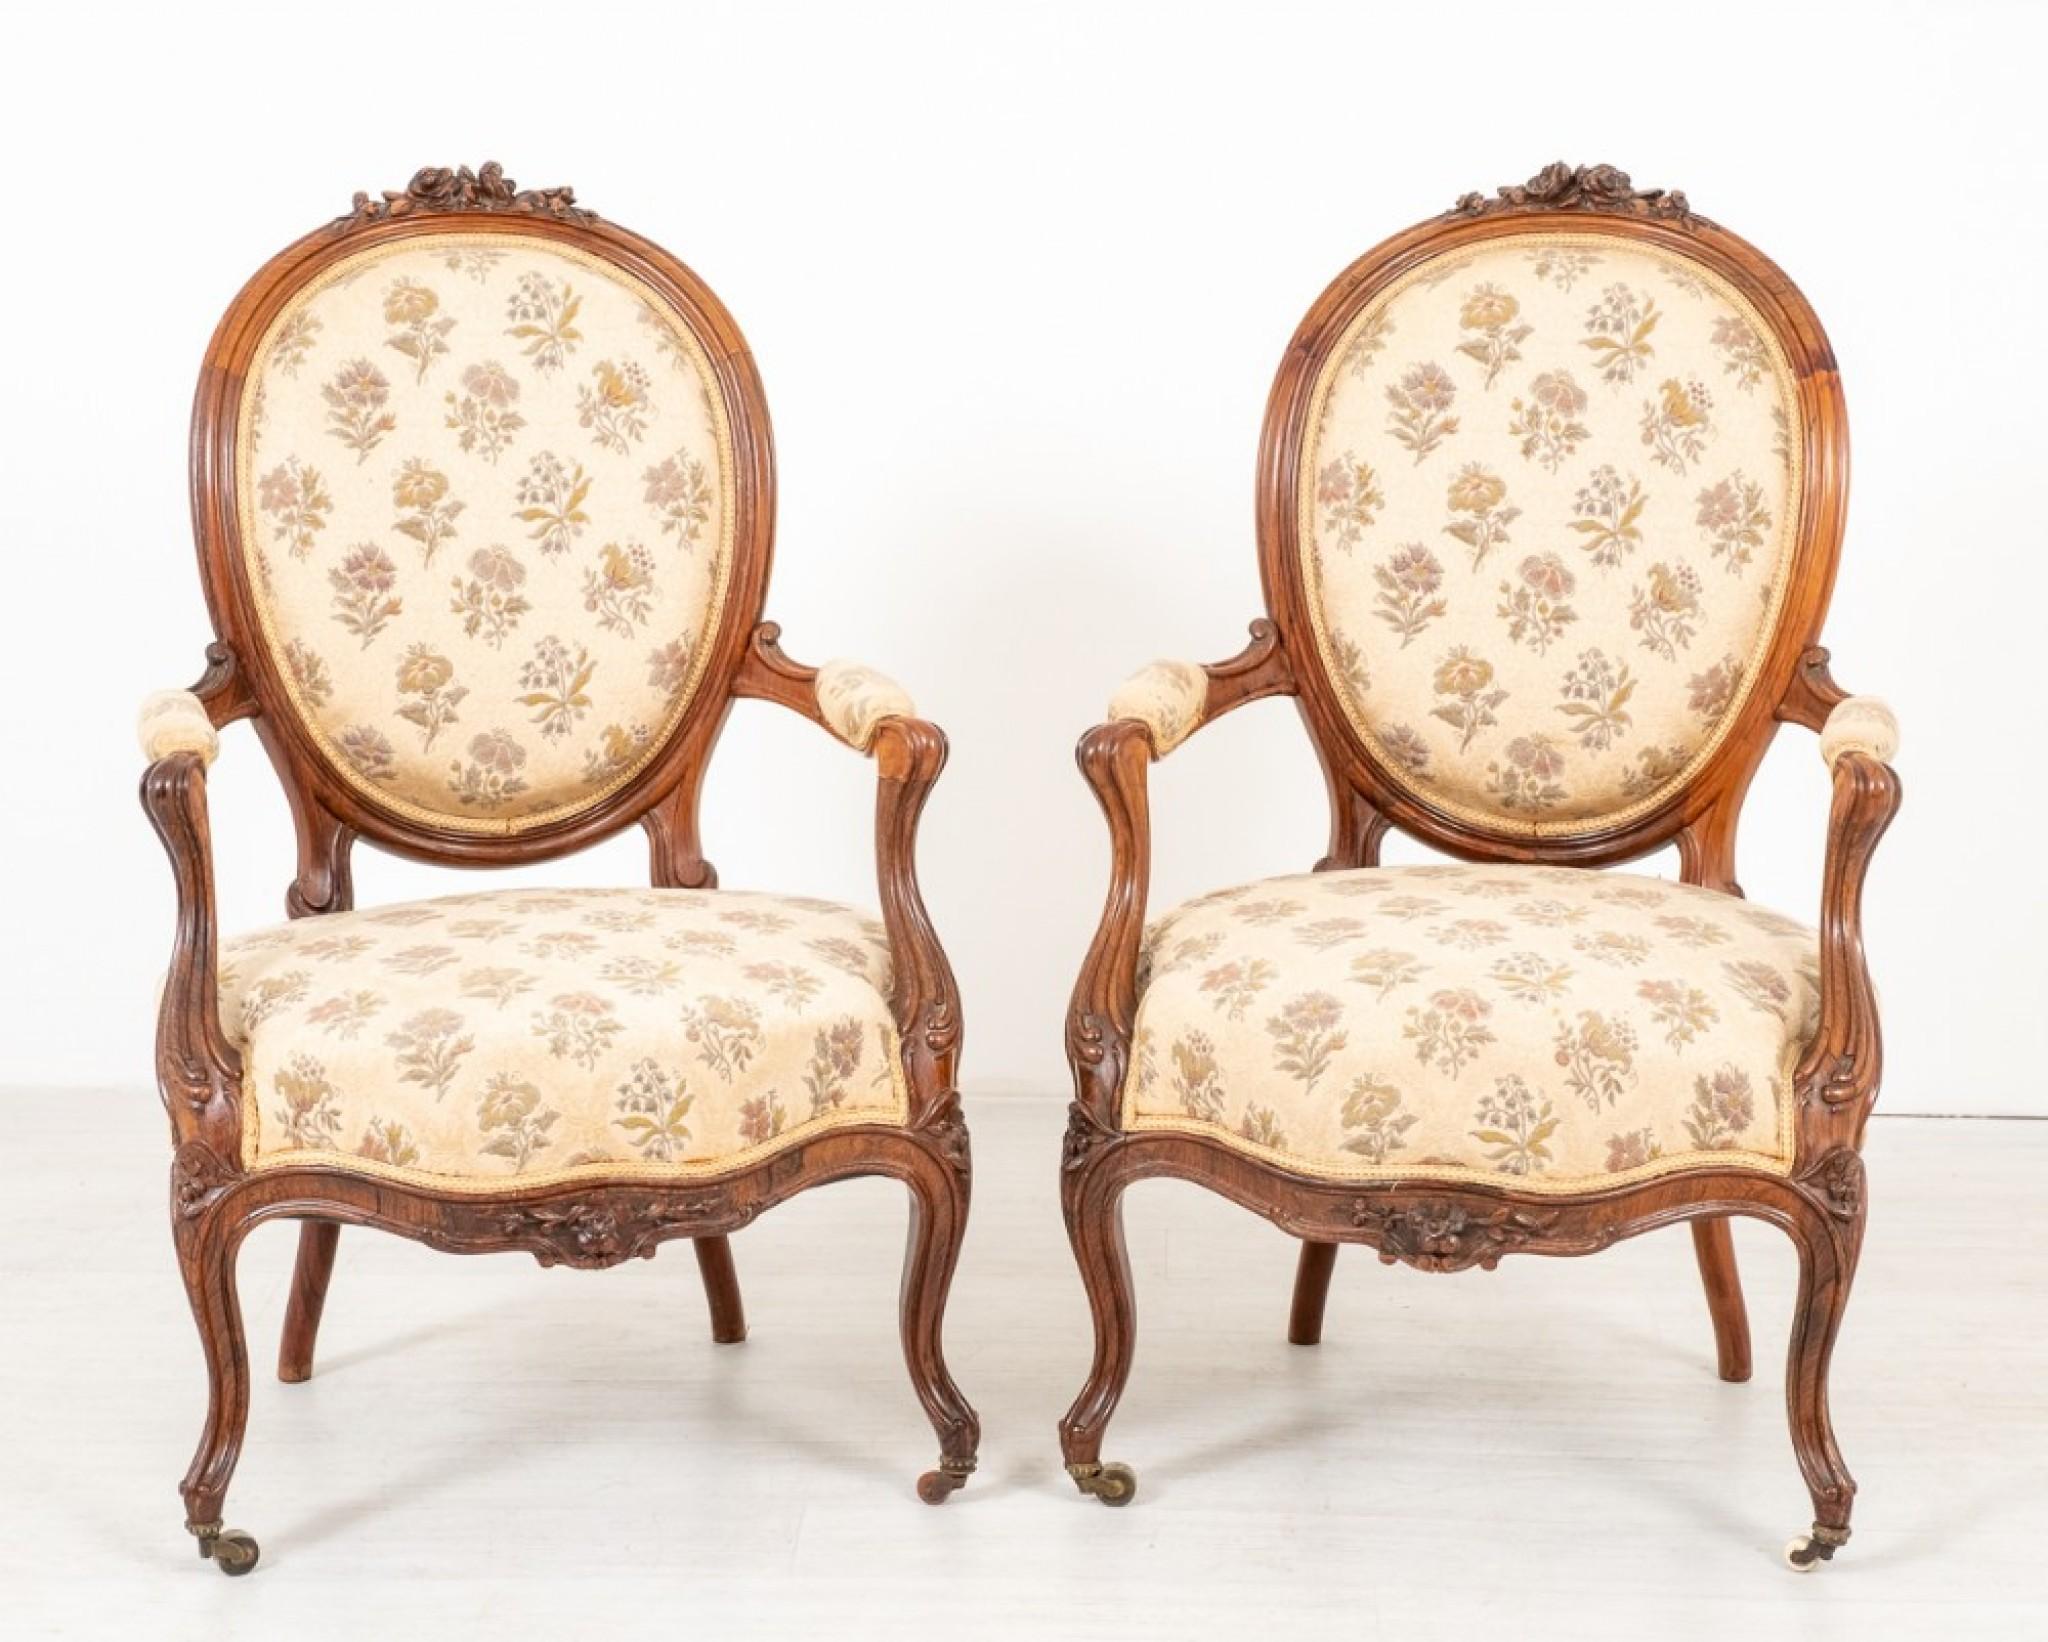 Rosewood Victorian Settee Chair Set Antique Couch Parlour Suite, 1860